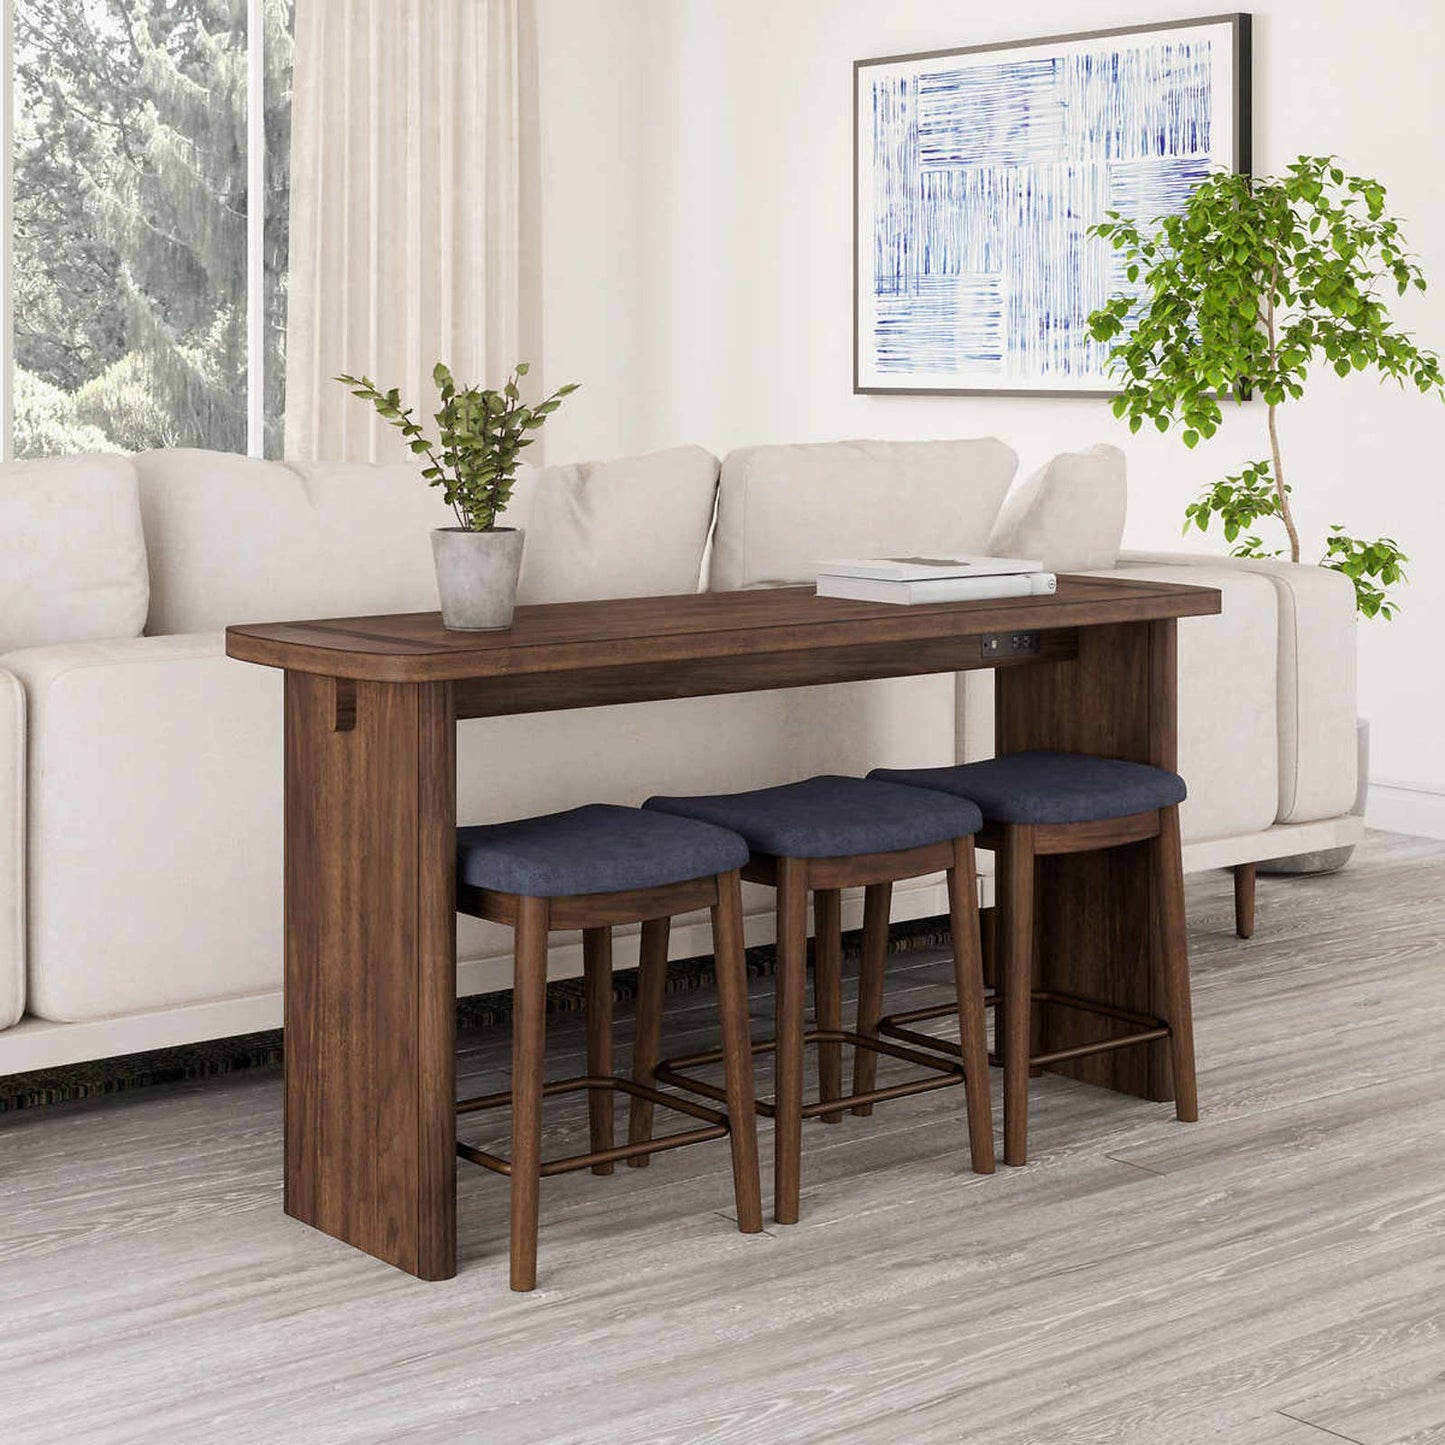 NEW - Costco - Isabel 4-piece Sofa Table Set - Retail $599